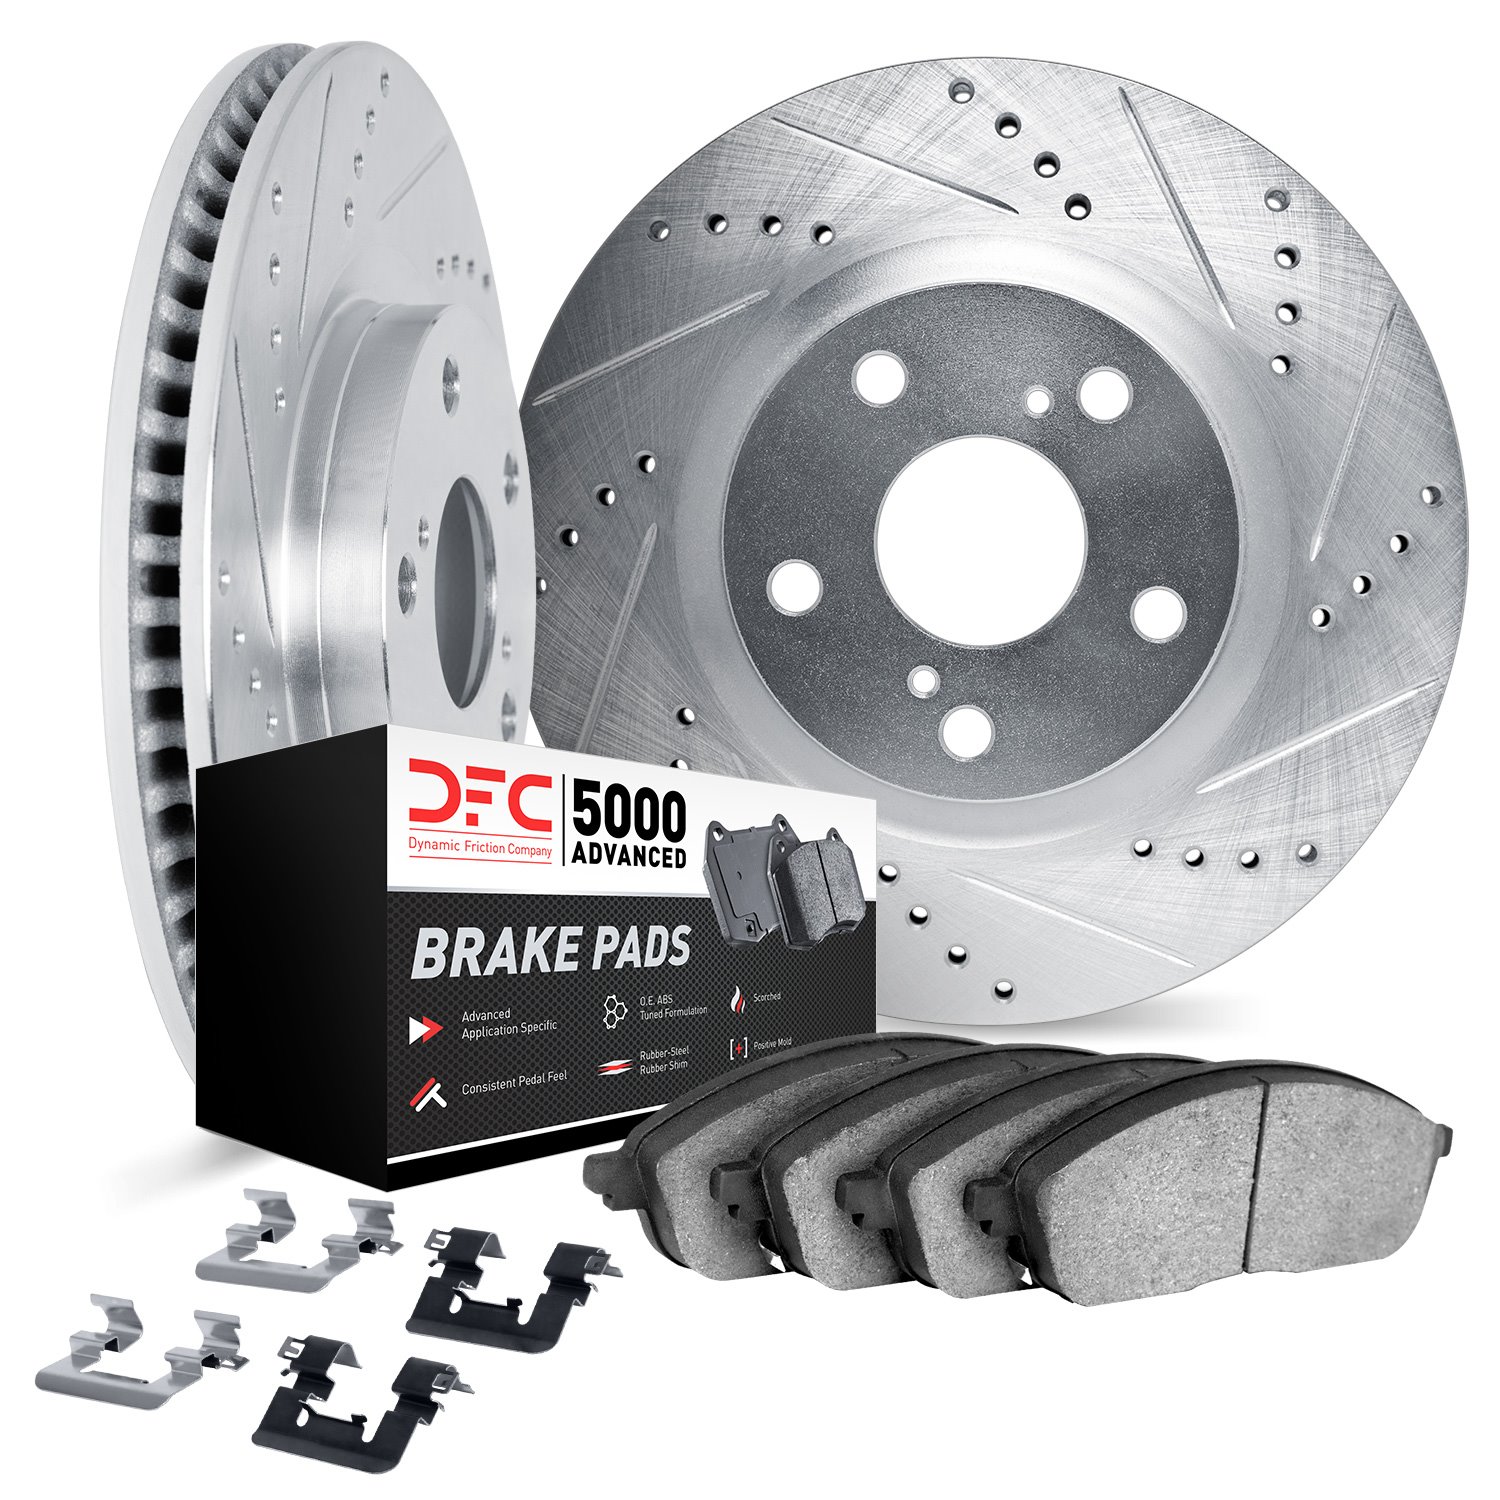 7512-73092 Drilled/Slotted Brake Rotors w/5000 Advanced Brake Pads Kit & Hardware [Silver], Fits Select Audi/Volkswagen, Positio